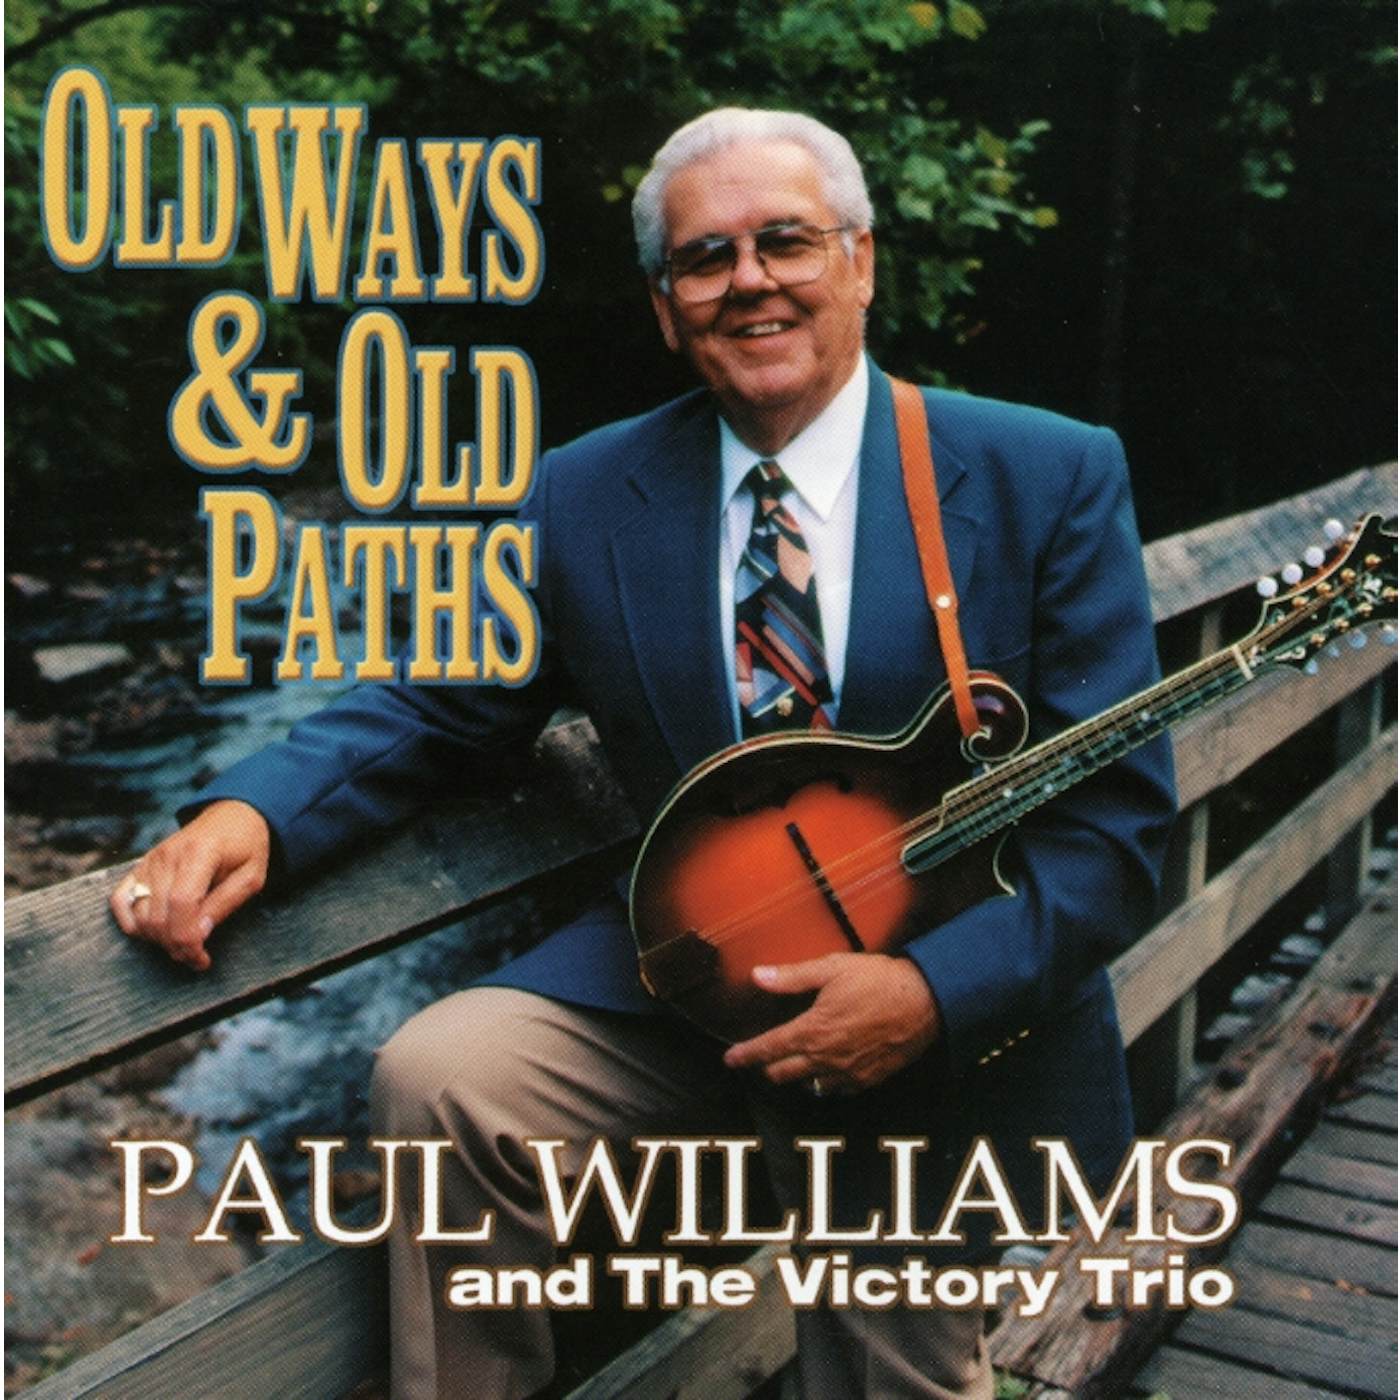 Paul Williams OLD WAYS & OLD PATHS CD